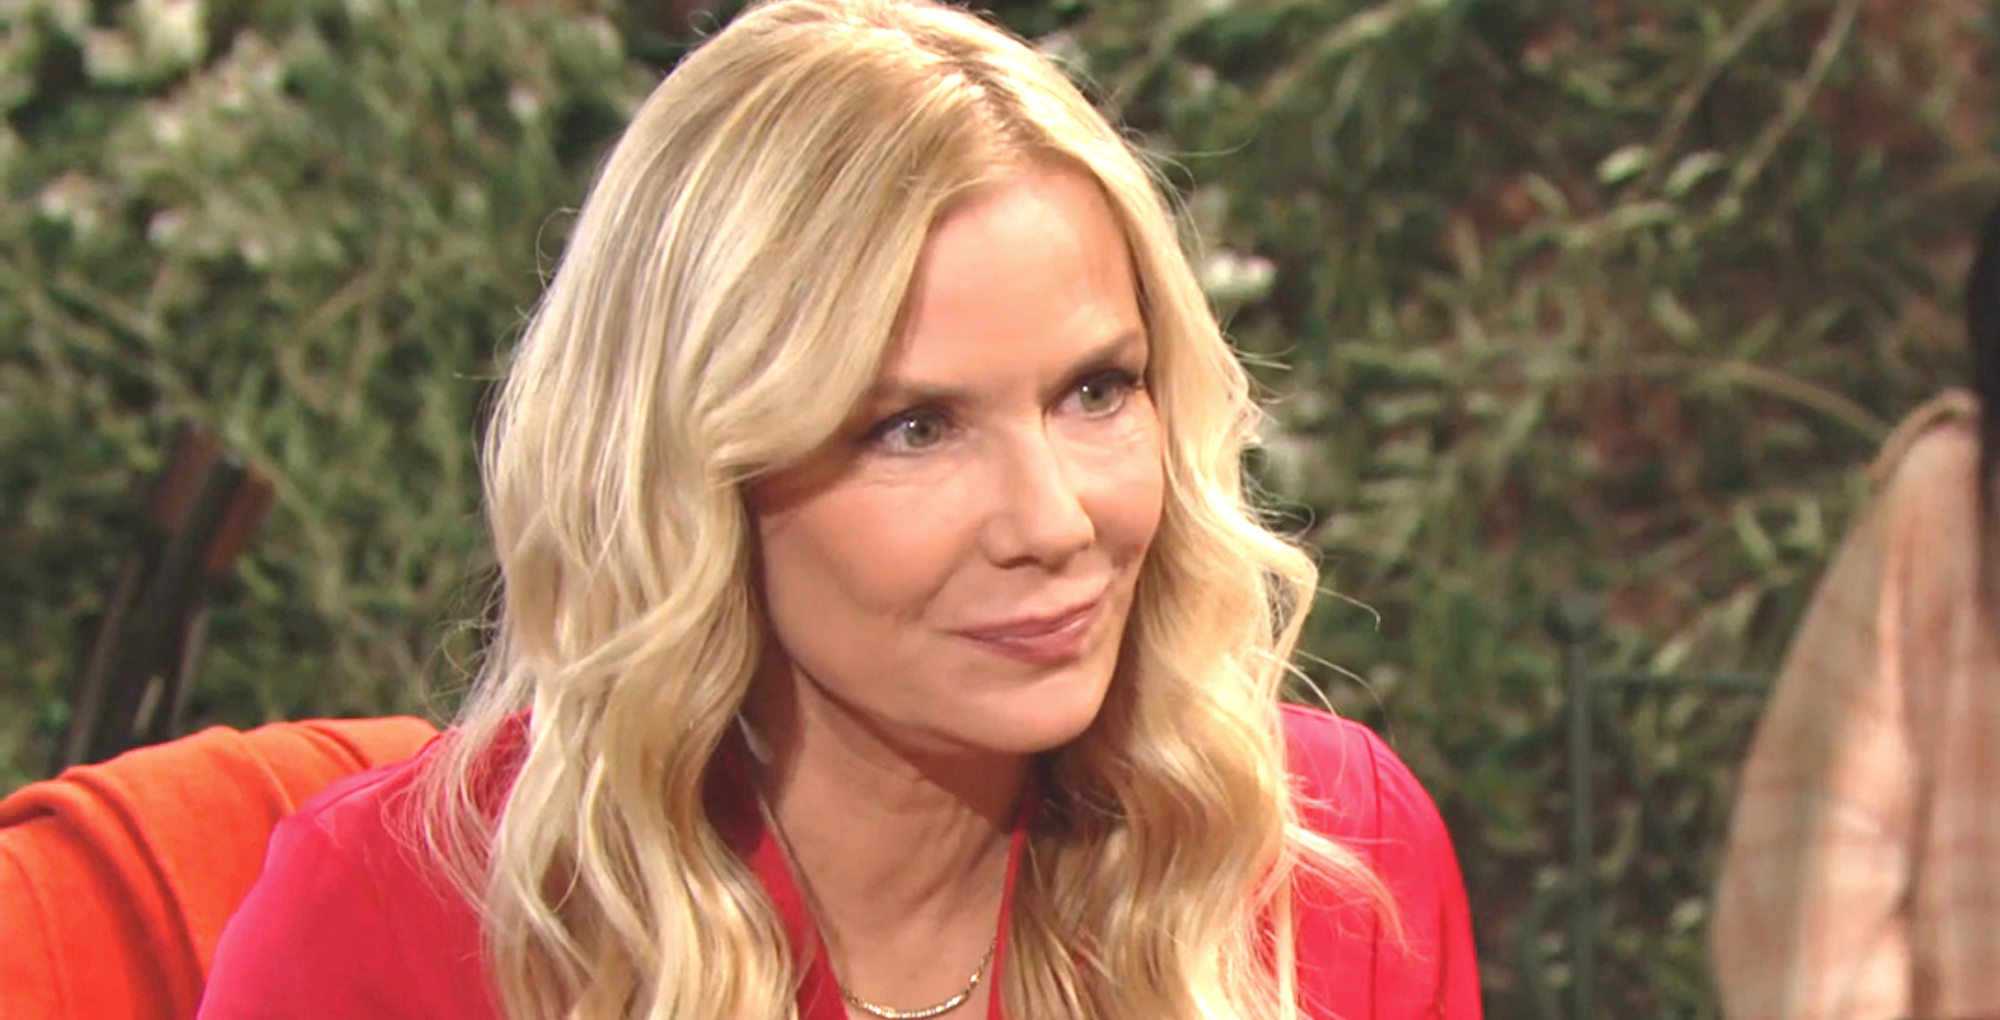 bold and the beautiful spoilers for february 24, ,2023 have brooke logan looking very happy